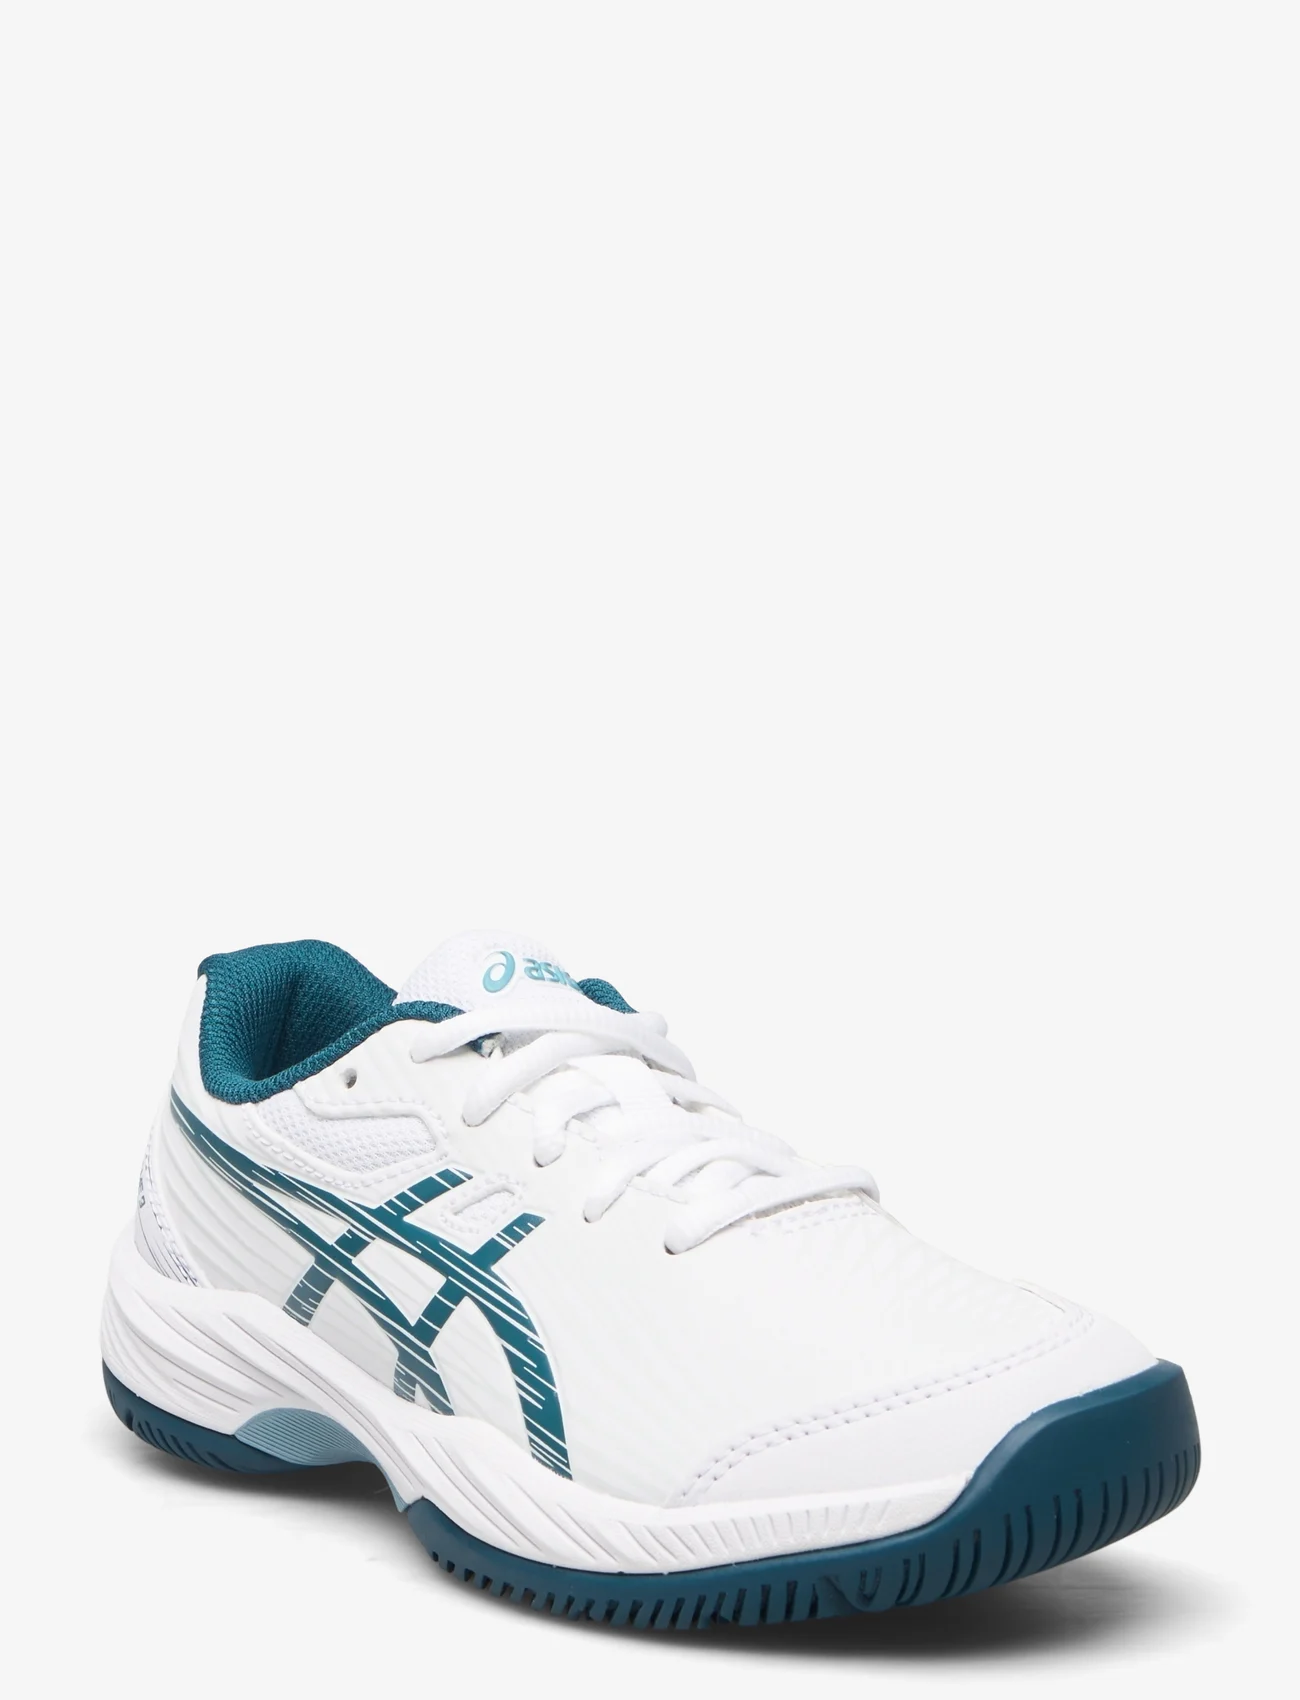 Asics - GEL-GAME 9 GS - training shoes - white/restful teal - 0